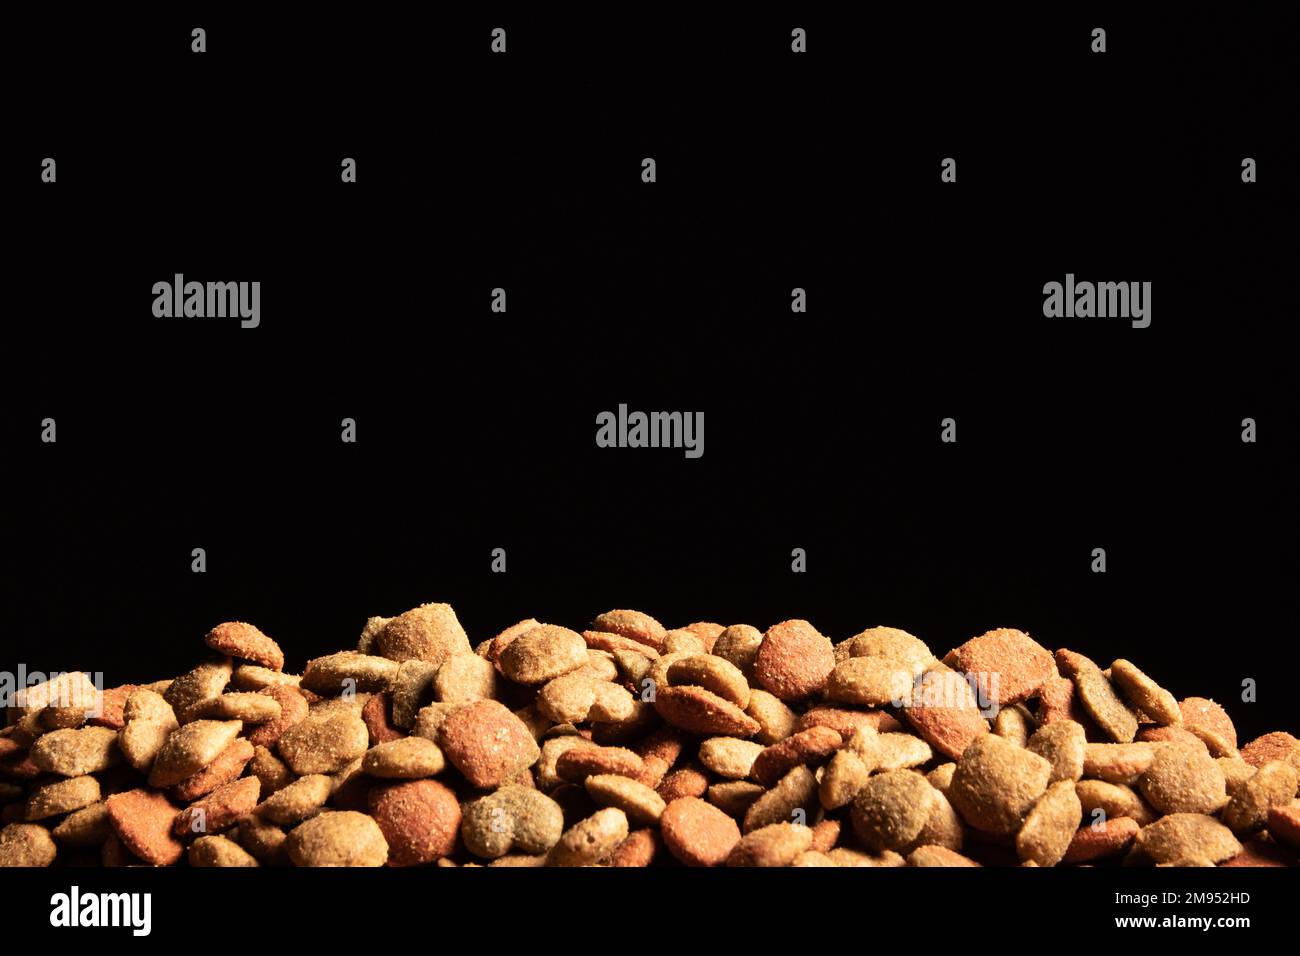 Close-up of dry dog food in warm colors on a black background Stock Photo